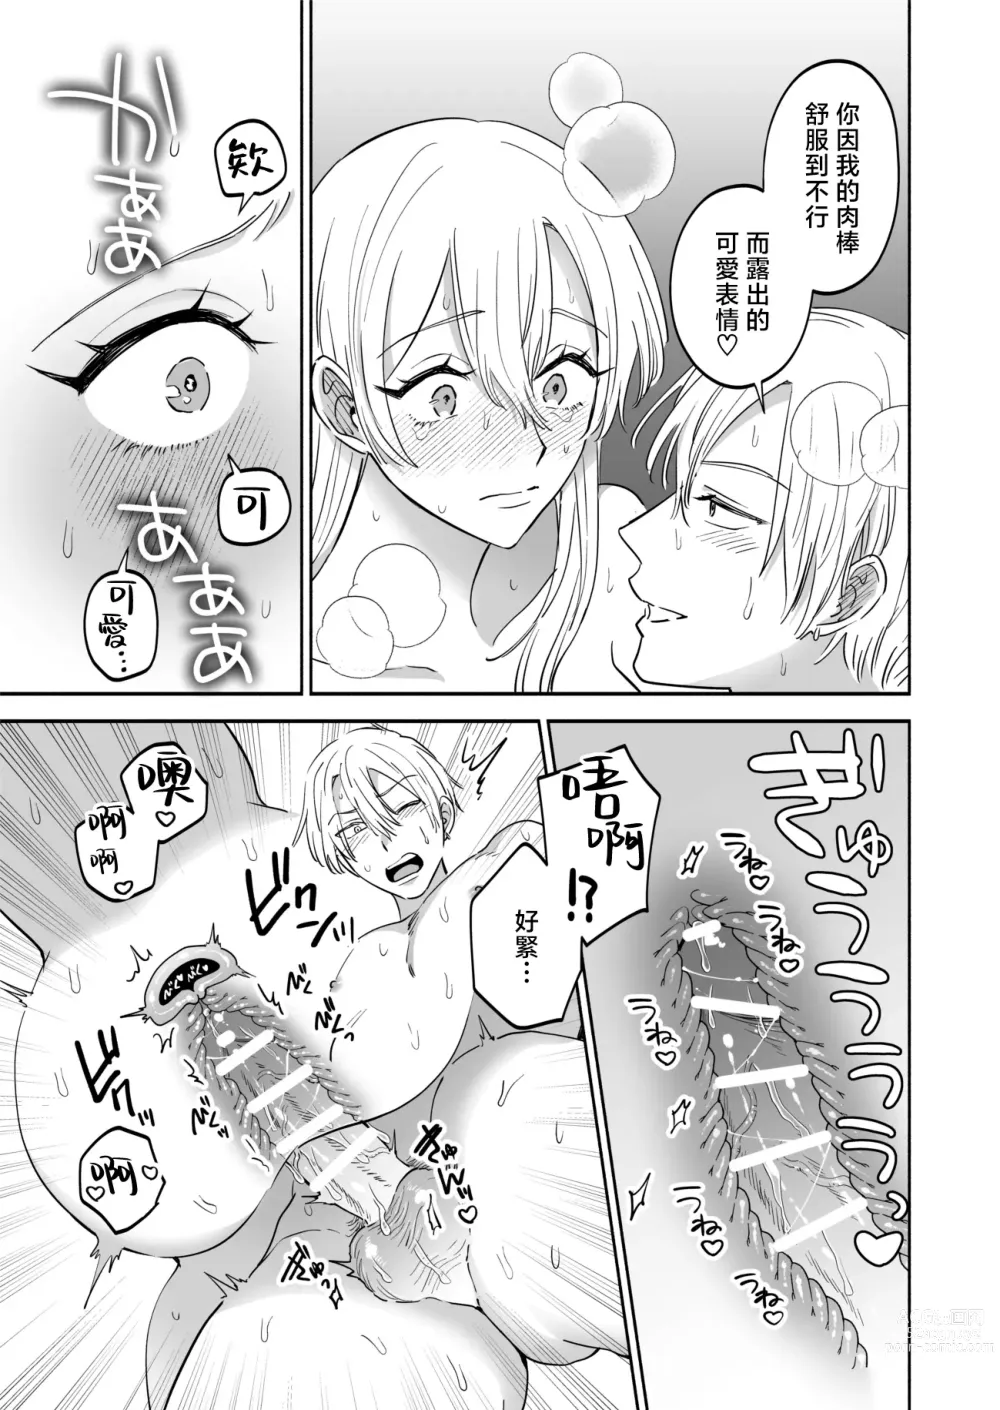 Page 23 of doujinshi 炮友的独占欲